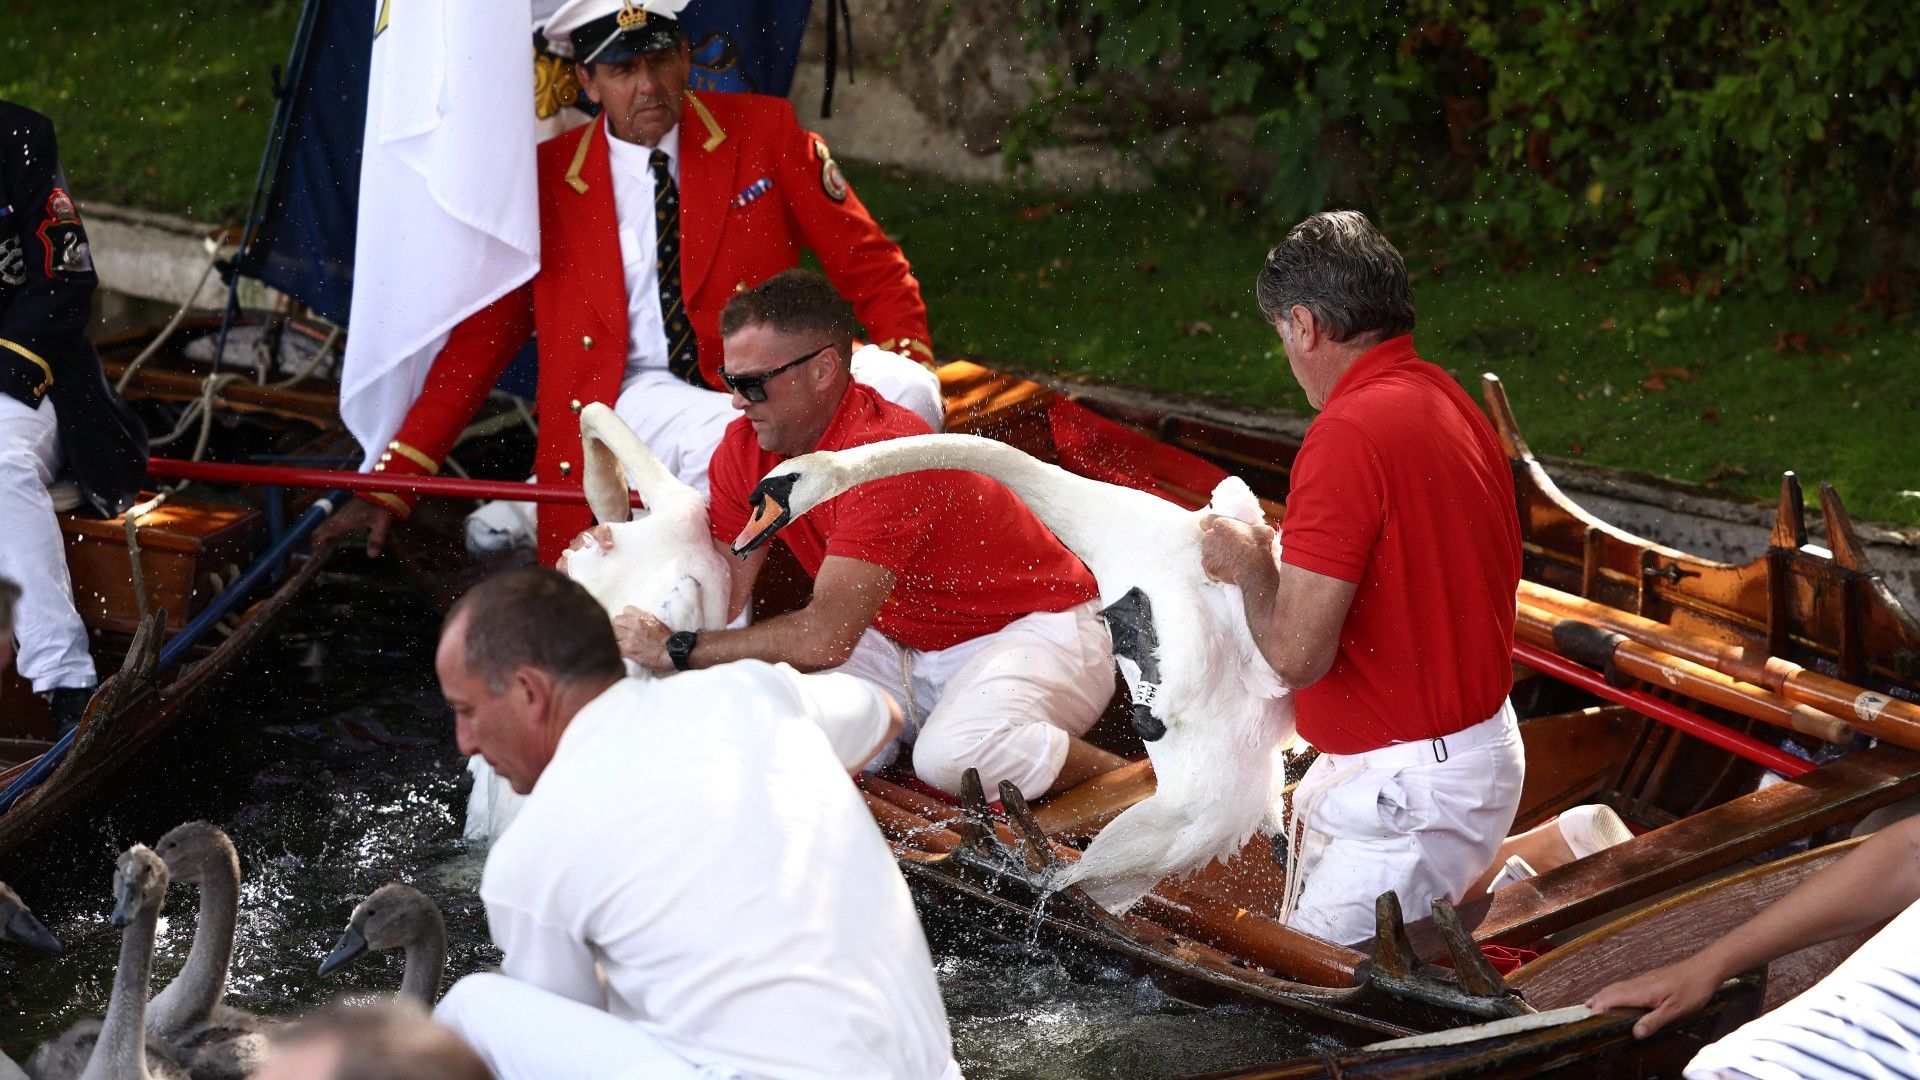 <p>                     No, this royal tradition isn't quite as bizarre as it sounds! The annual swan 'upping' sees a group of people – led by The King's Swan Marker – travel through the River Thames on row boats, checking the health of all the swans they come across, and ensuring that none are injured or unwell.                    </p>                                      <p>                     The King, as monarch, technically owns all unclaimed swans who swim in open water, but livery companies the Vintners and the Dyers also own a portion of the swans on the Thames.                   </p>                                      <p>                     Though this ritual doesn't actually involve a member of the family, it is a process that is overseen by the King's Swan Marker, on the monarch's behalf. The Swan Marker's primary job is to oversee the health of the UK's swans year-round and to educate groups on the conservation of the swan population and their habitats.                   </p>